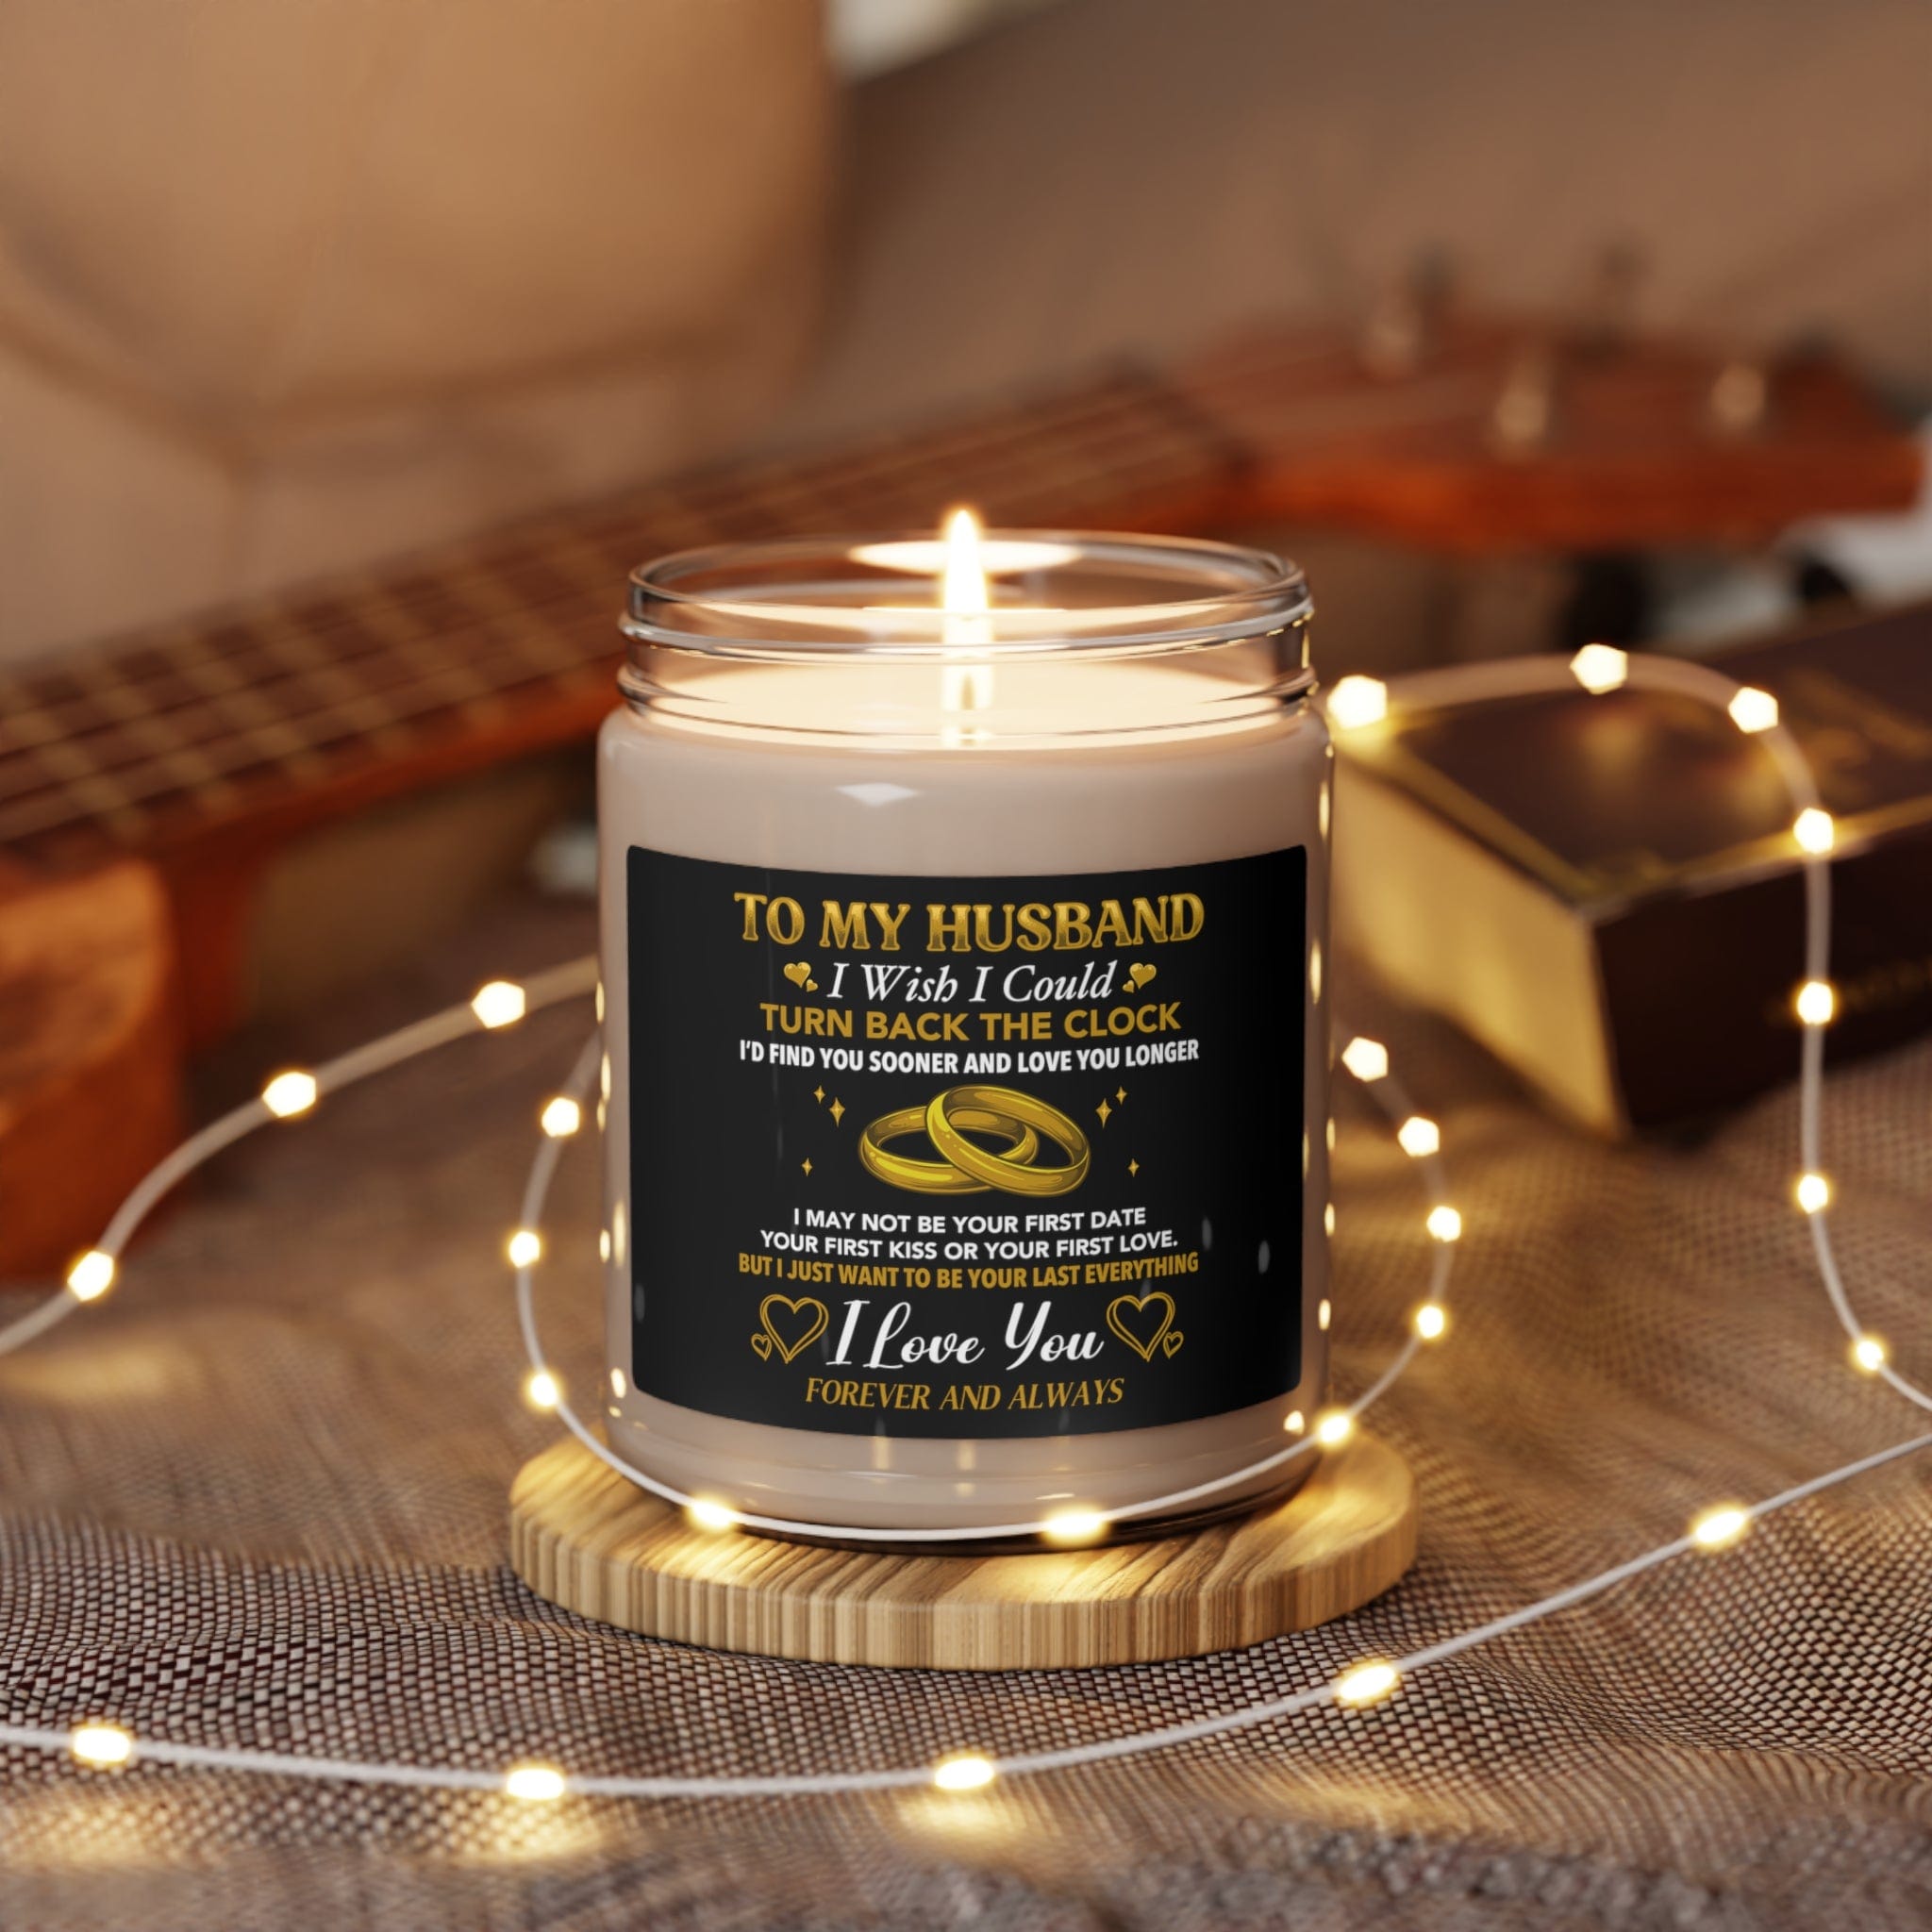 To My Husband Scented Soy Candle, 9oz